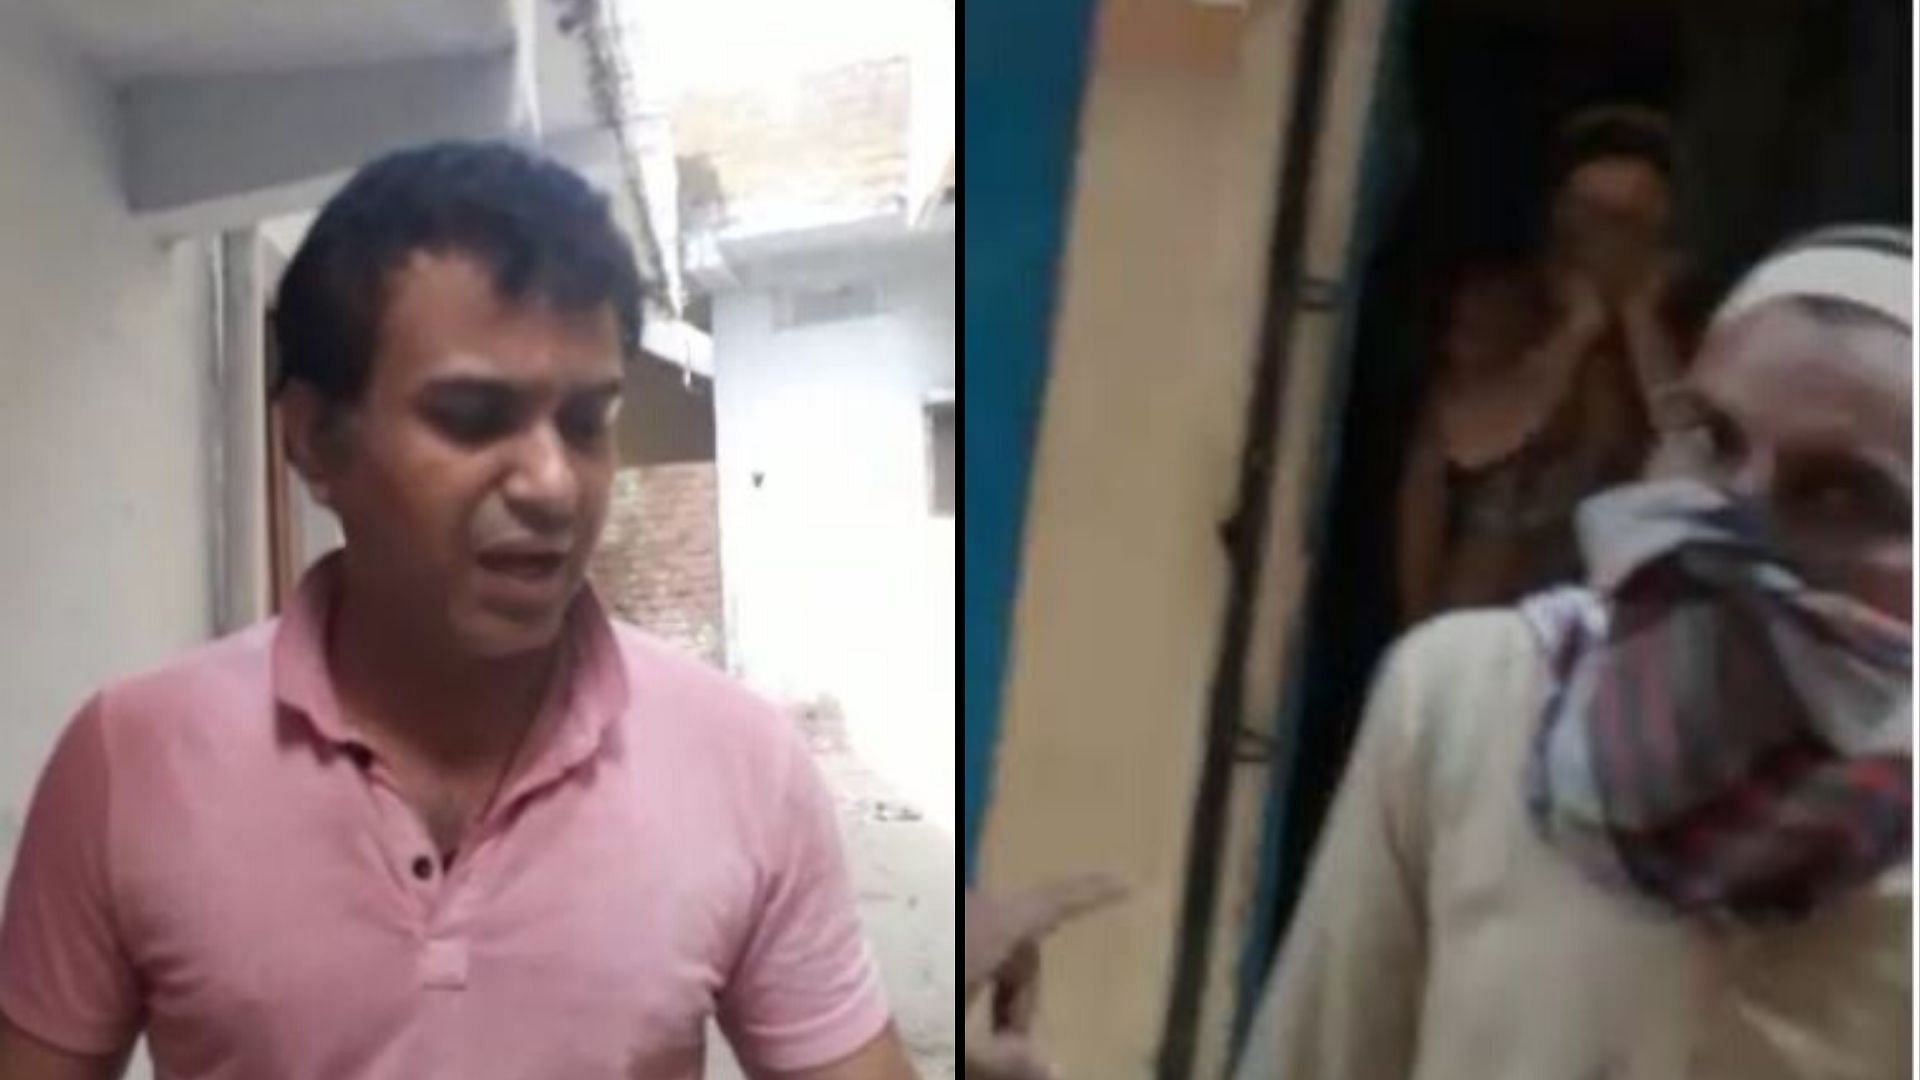 A Muslim civic worker was accused of “spitting” to spread coronavirus by a man in Bhopal who said, “News reports show one community cannot be trusted.”